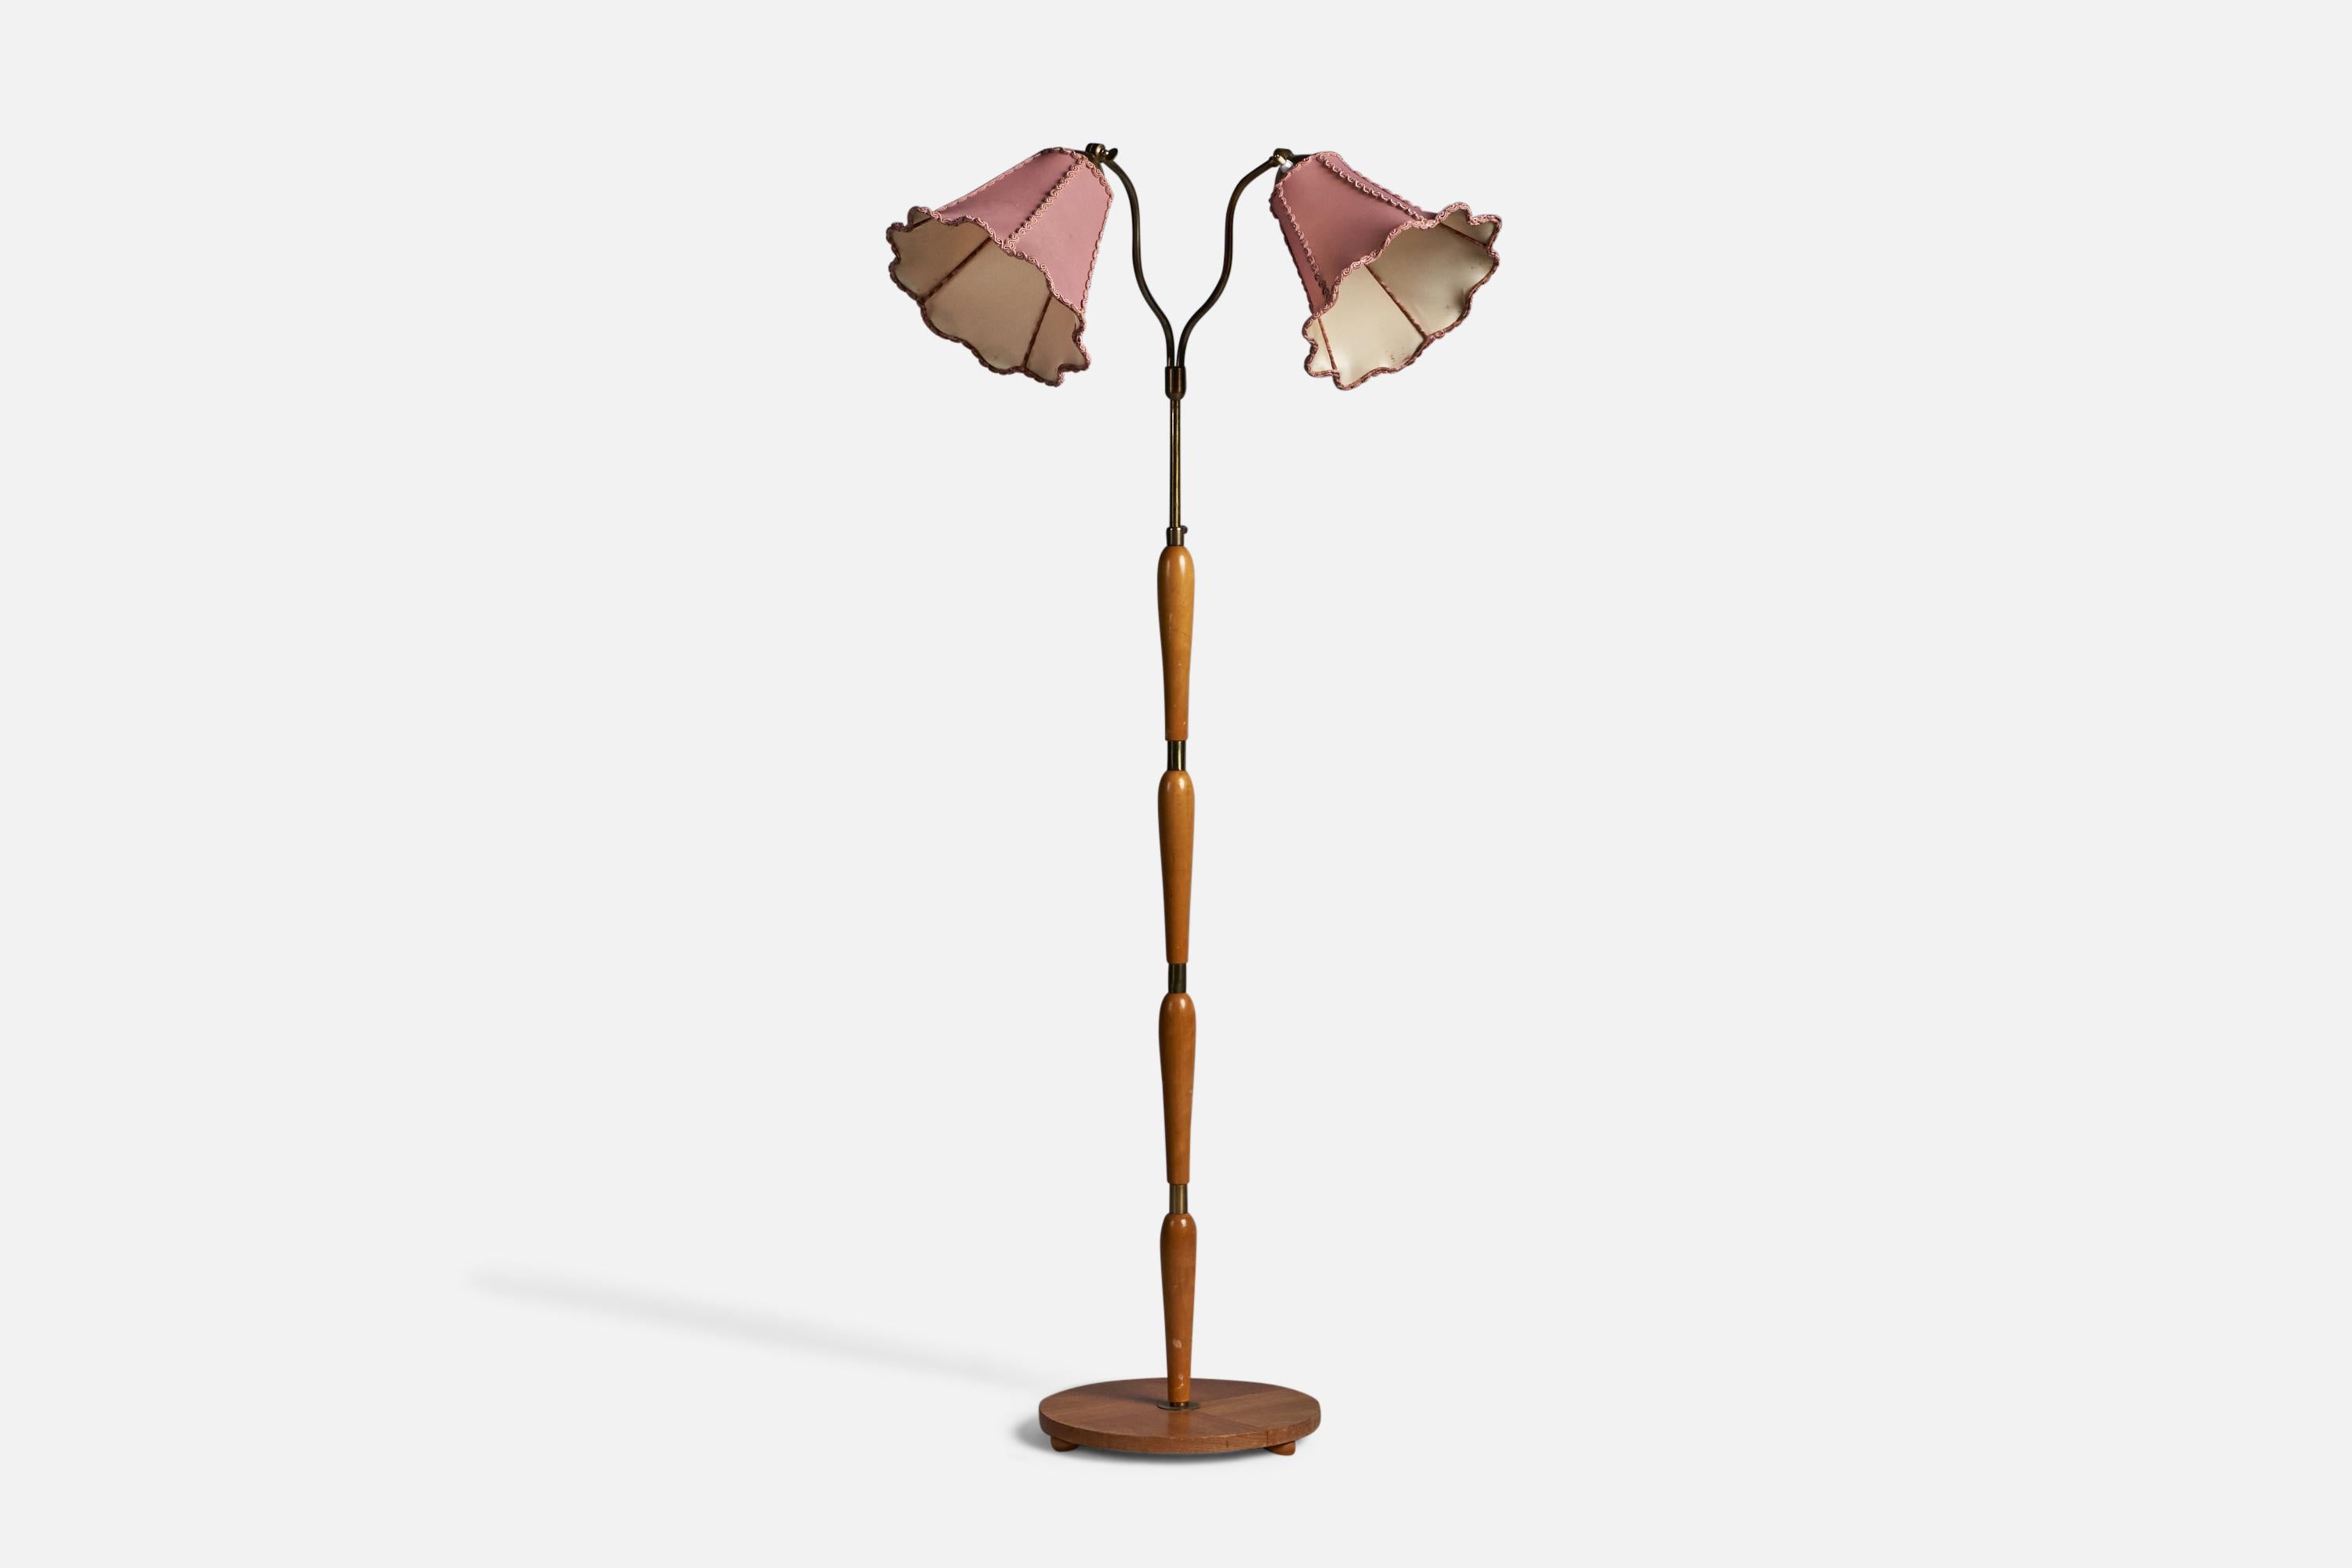 A two-armed elm, brass and pink fabric floor lamp, designed and produced in Sweden, 1930s.

Overall Dimensions (inches): 59.5